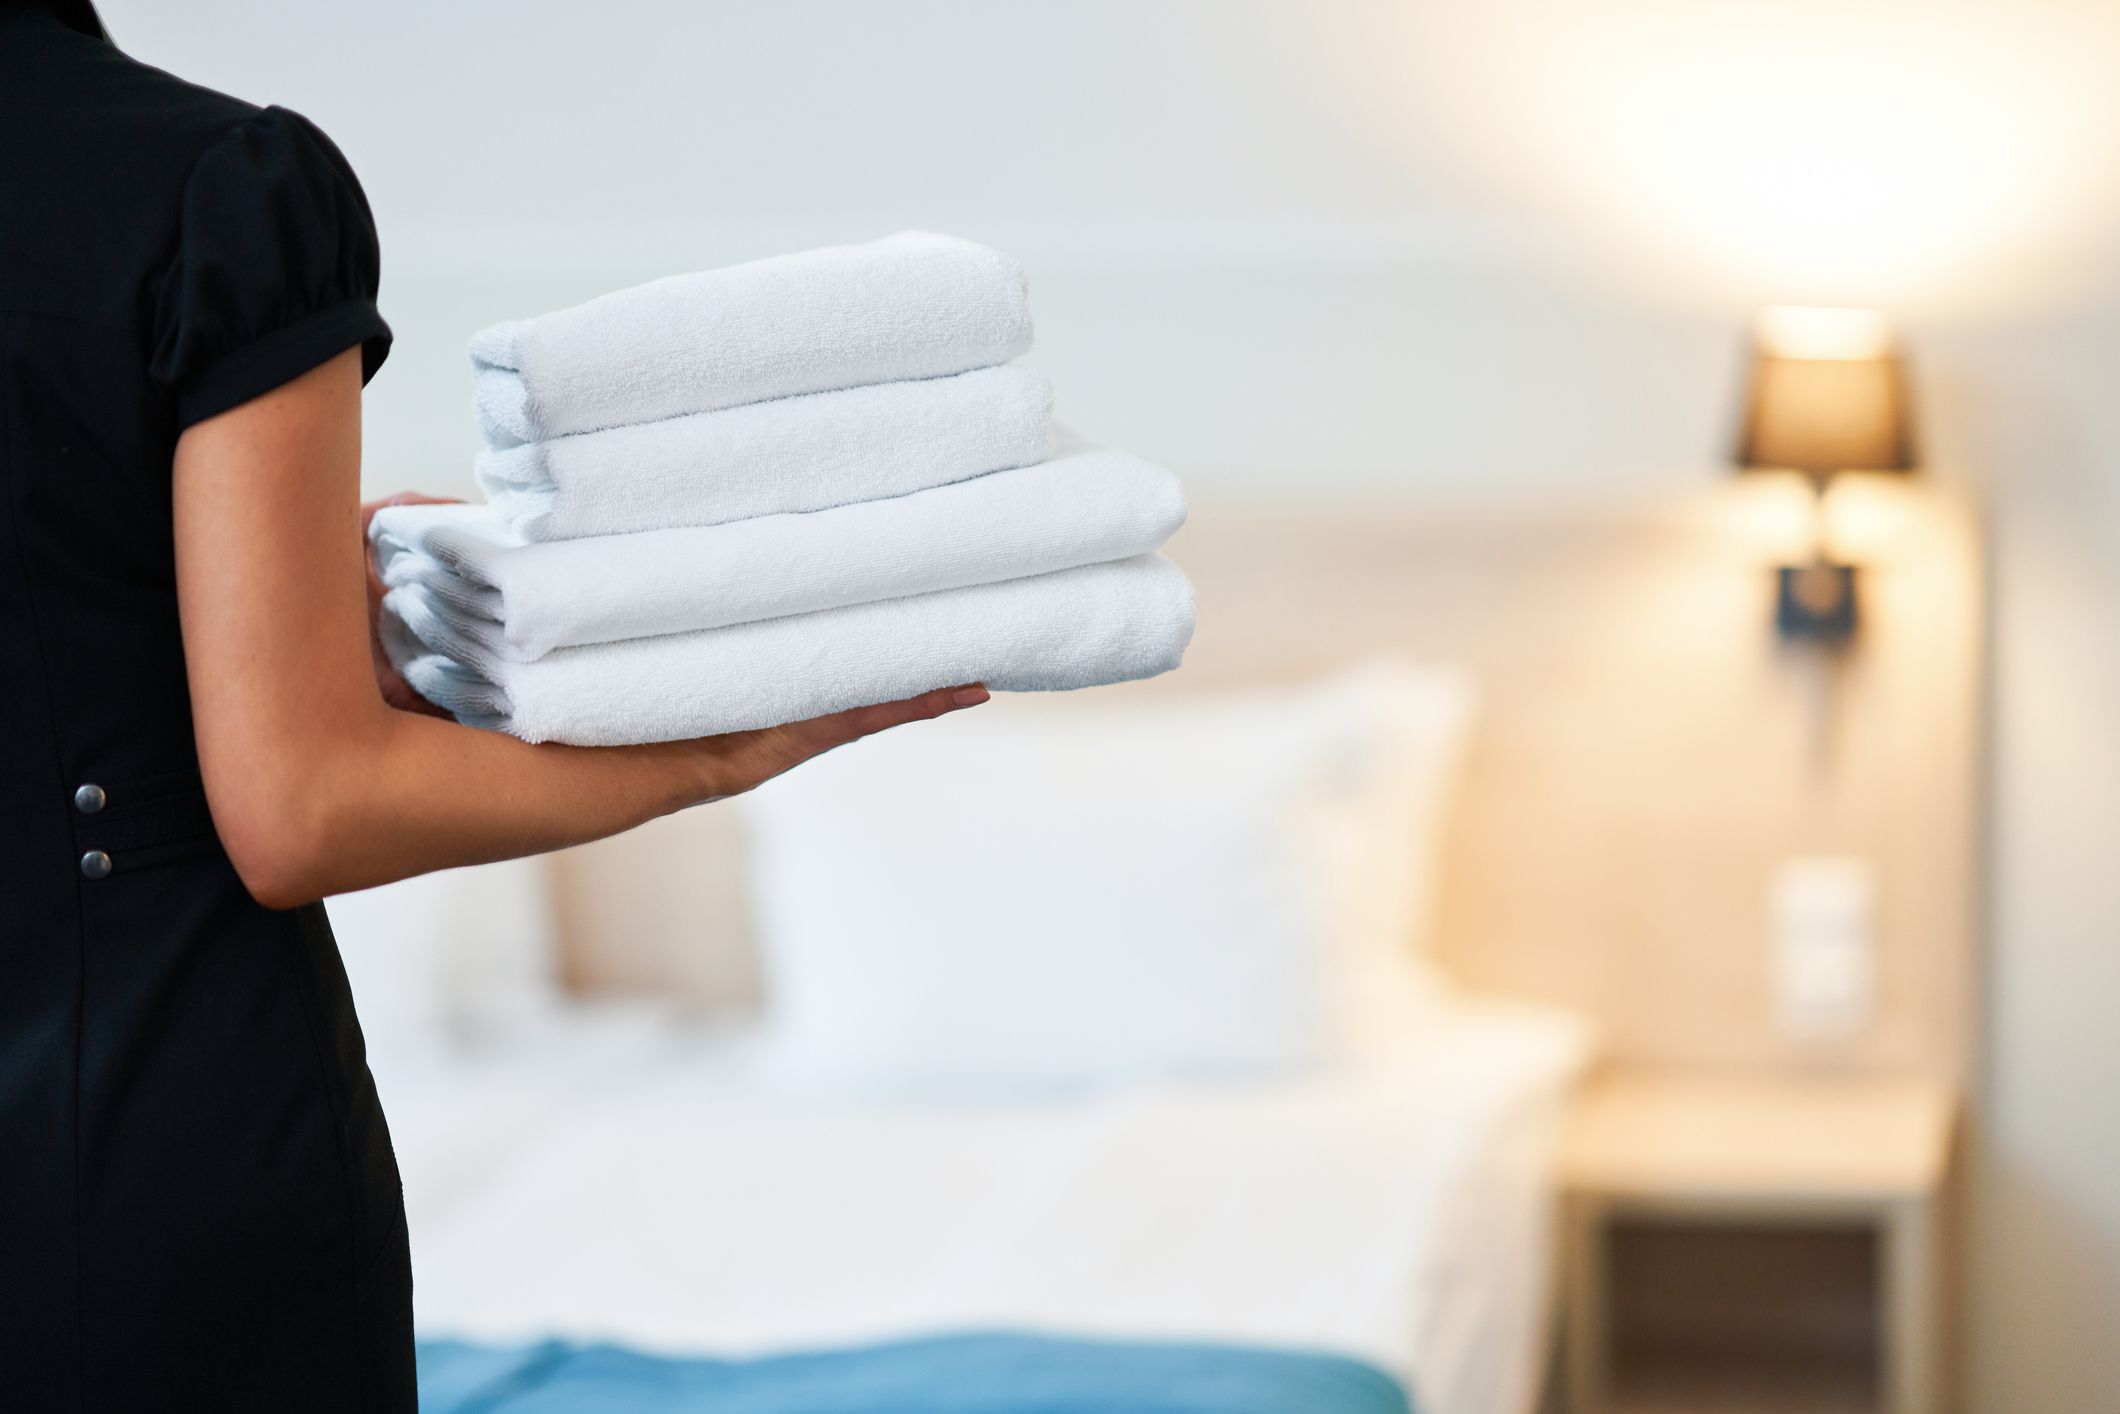 <p>At the height of COVID, it made sense not to send housekeeping staff in daily, but now, some hotels like Hilton and the Marriott have continued this practice. Post-COVID, it’s a trend that’s continued. According to a <a href="https://www.cbsnews.com/news/hotels-end-basic-amenities-no-more-housekeeping-skimpflation/">report by CBS</a>, “Marriott's policies vary by property, but housekeeping is usually offered only upon request, with all rooms cleaned automatically every sixth night. Hilton's default is no more daily cleanings at most properties unless requested. Walt Disney World reduced service to light housekeeping every other day. That entails towel replacement and trash removal but doesn't necessarily include services you might expect, like getting your bed made.” We’re honestly not sure how we feel about this. </p> <p><b>Related:</b> <a href="https://blog.cheapism.com/things-we-used-get-free/">Things We Used To Get For Free (But Now We Have To Pay For)</a></p>